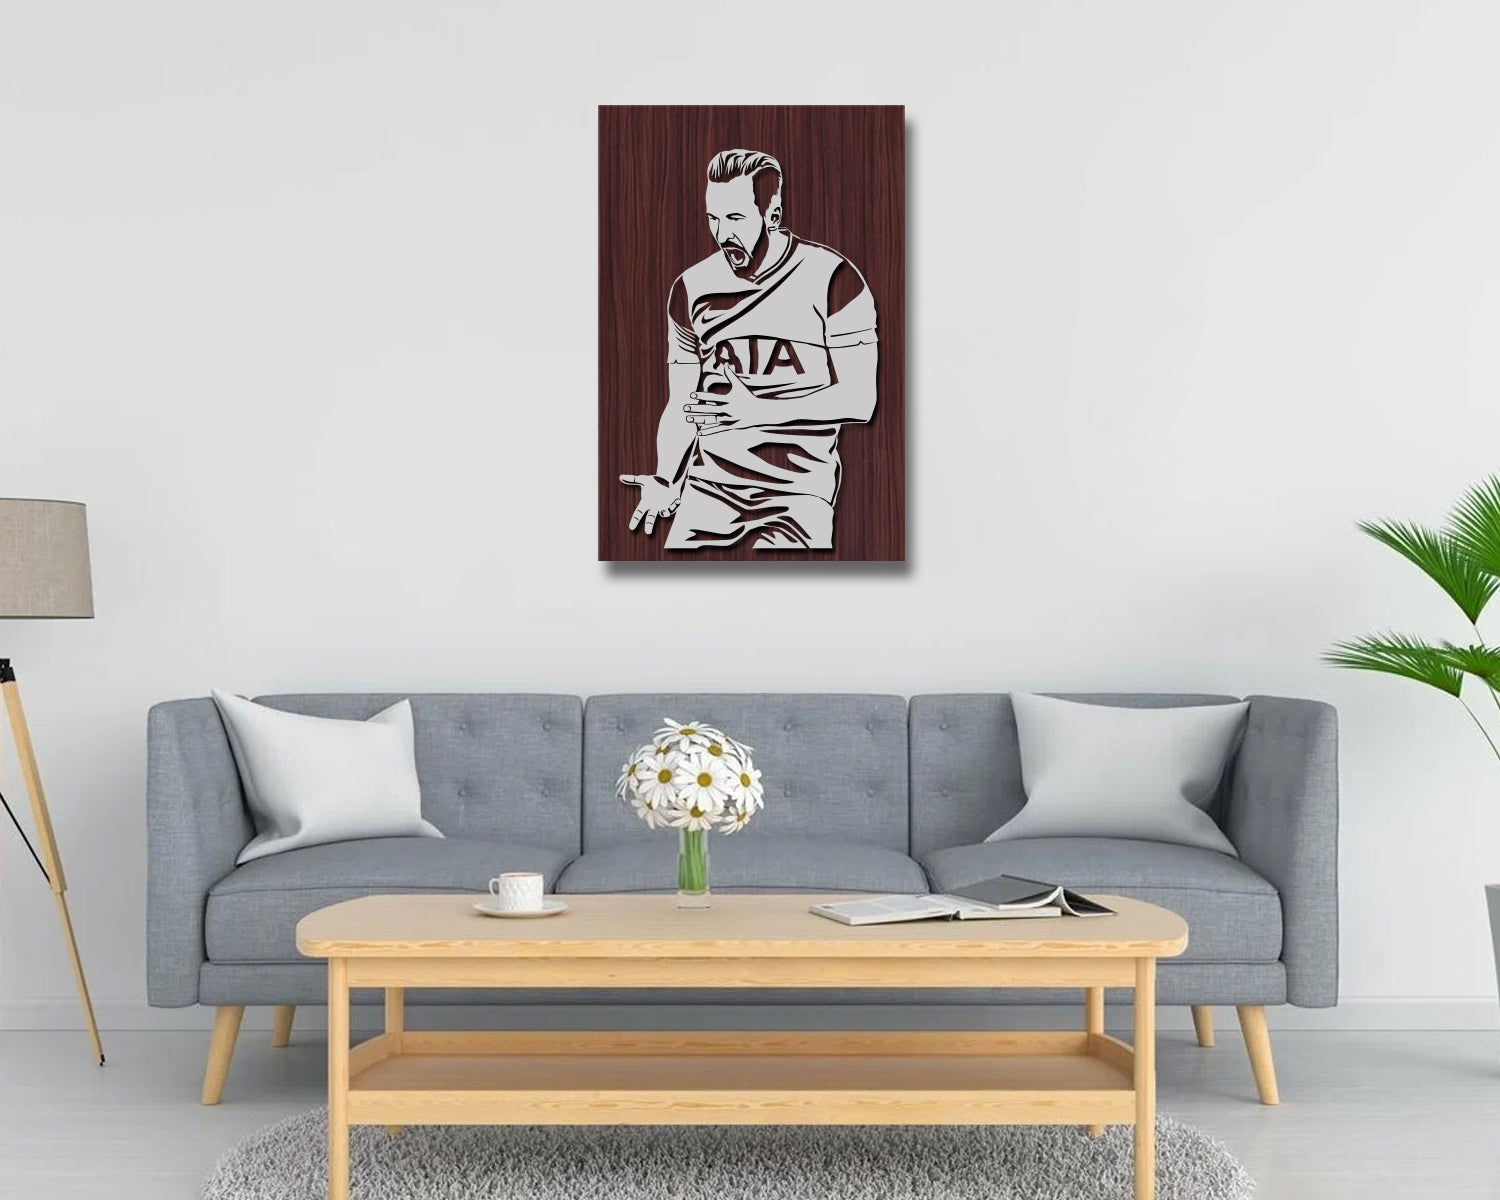 Harry Kane LED Wooden Decal 